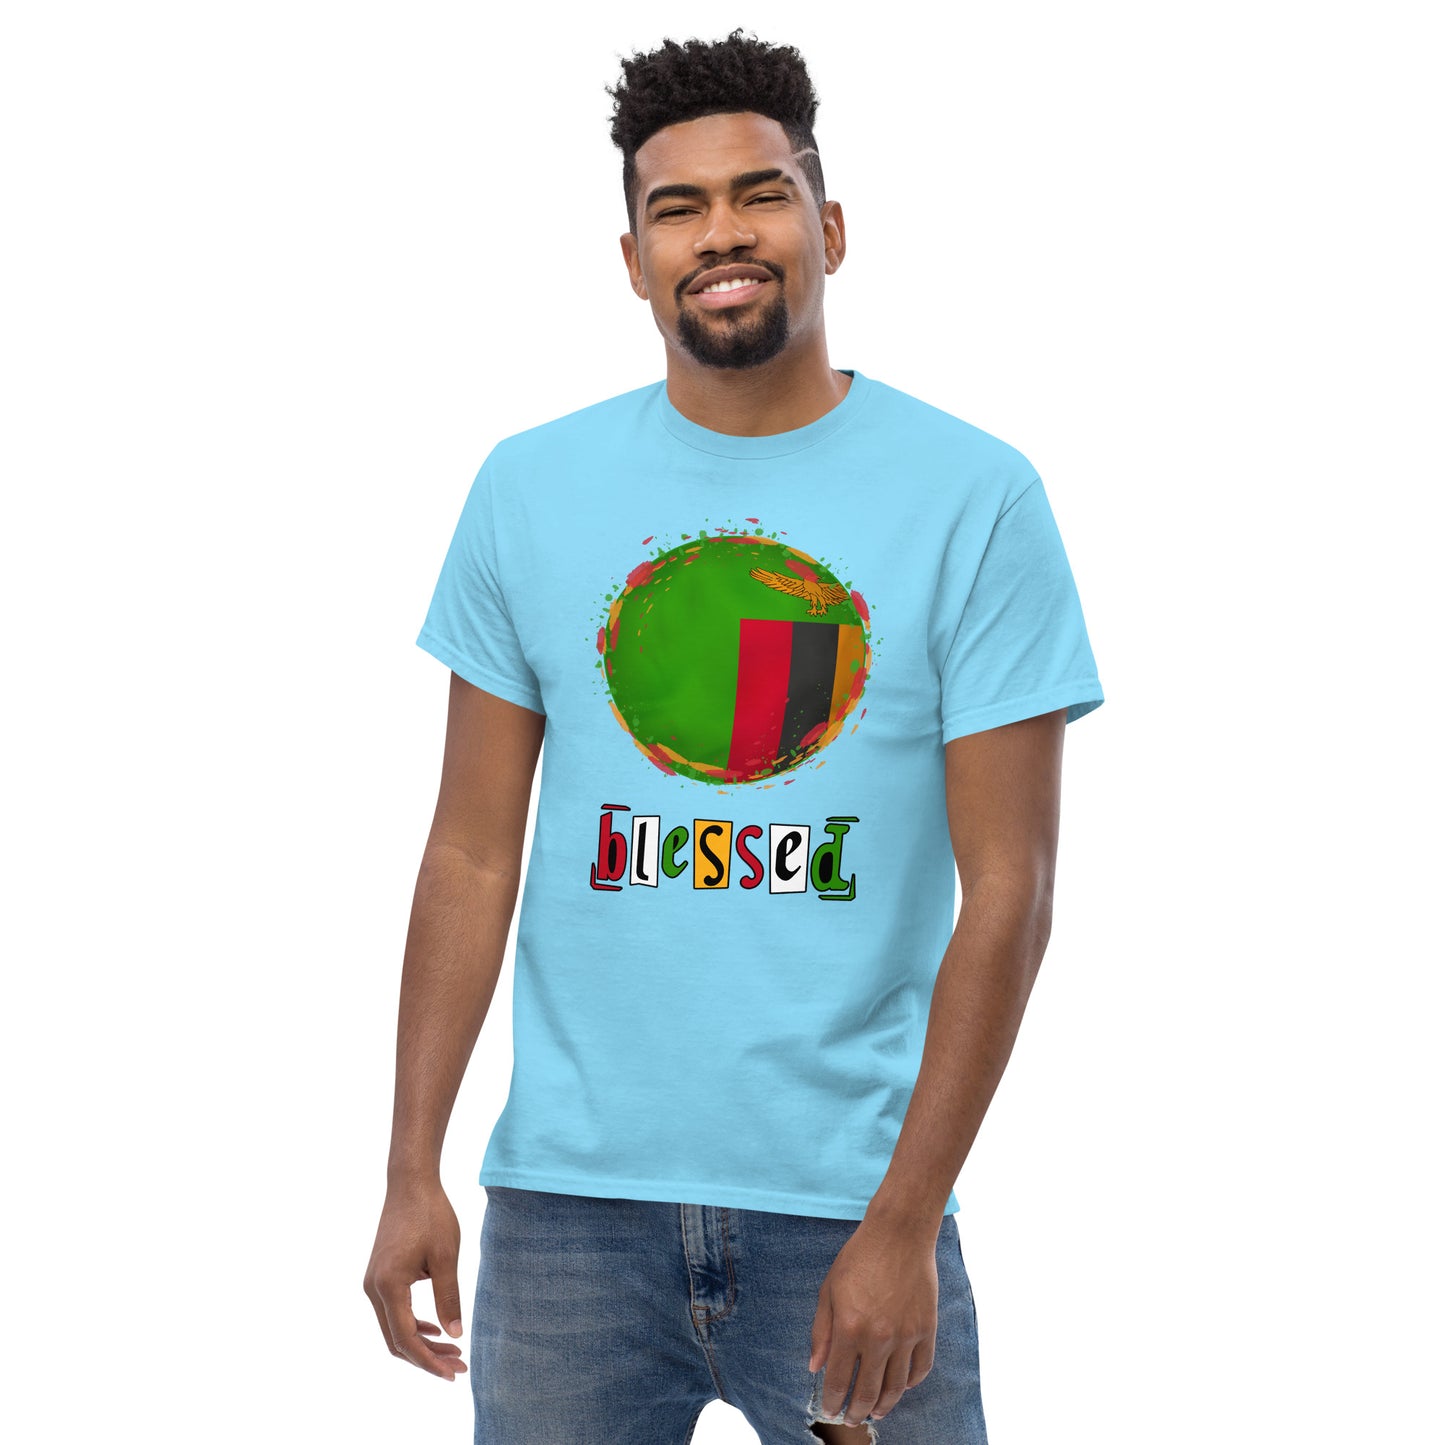 Men's classic Blessed t shirt